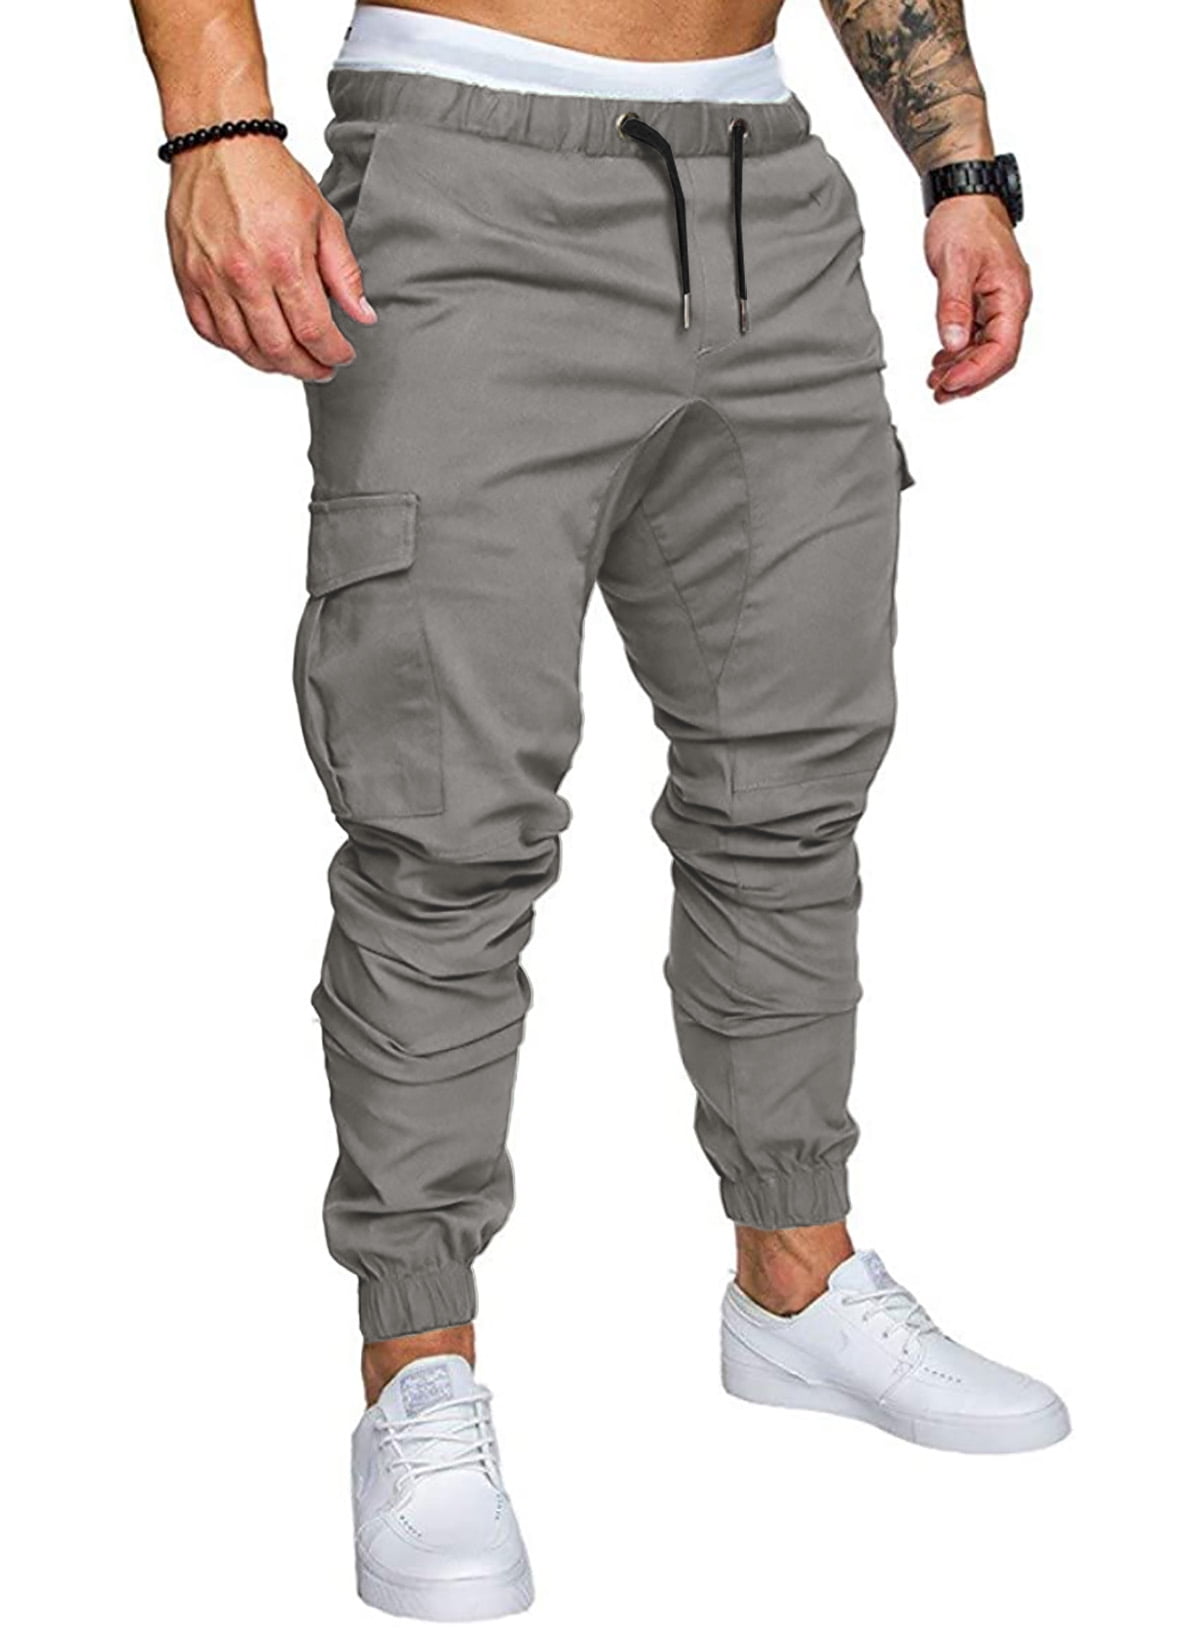 JMIERR Men Cargo Pants Casual Work Cotton Trousers Stretch Pants Twill  Drawstring Athletic Joggers with 6 Pockets 